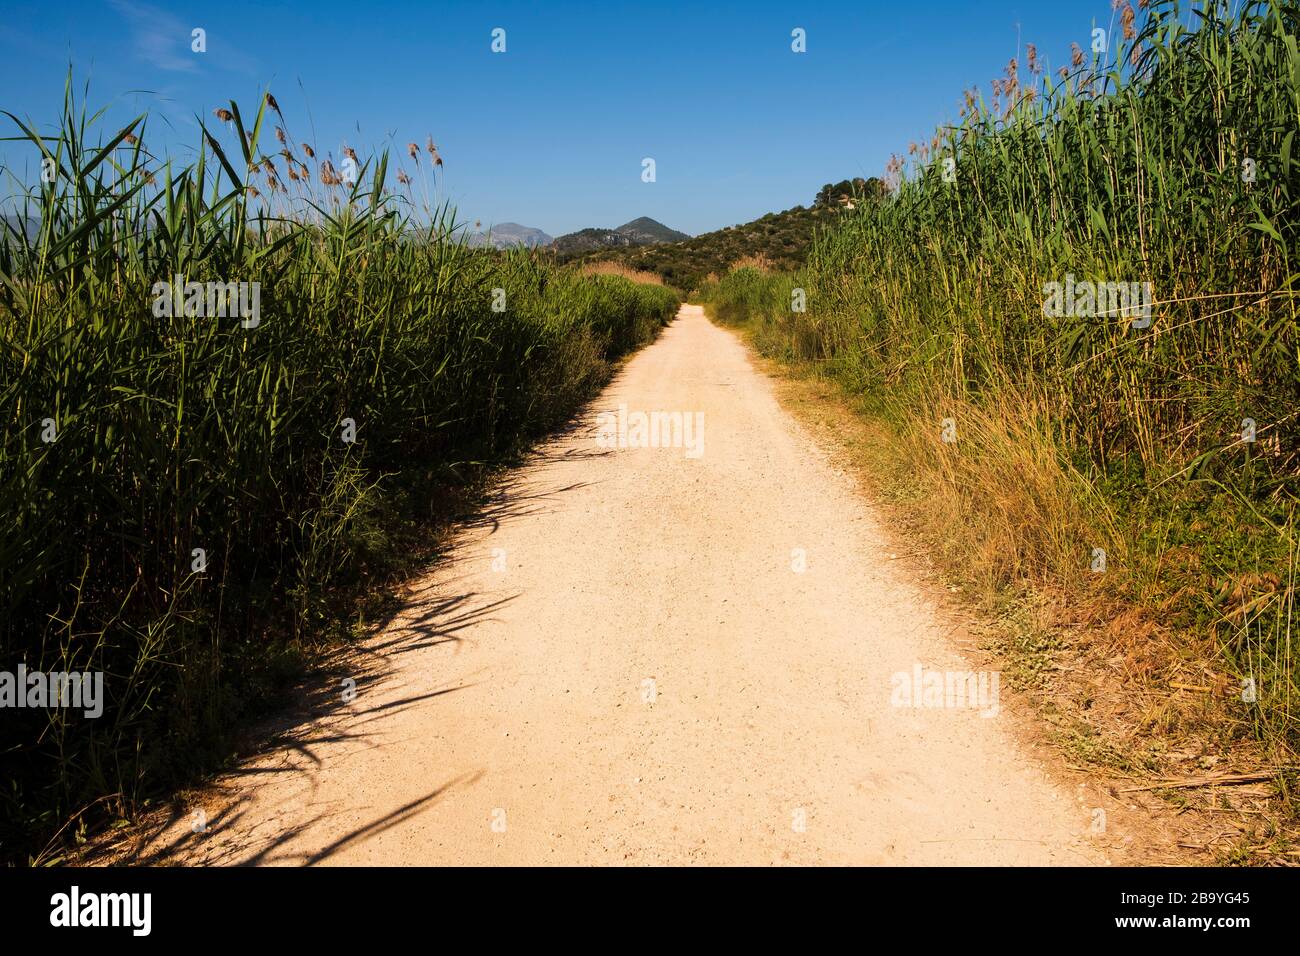 Dirt track through The Marjal at Font Salada, Oliva, Spain Stock Photo